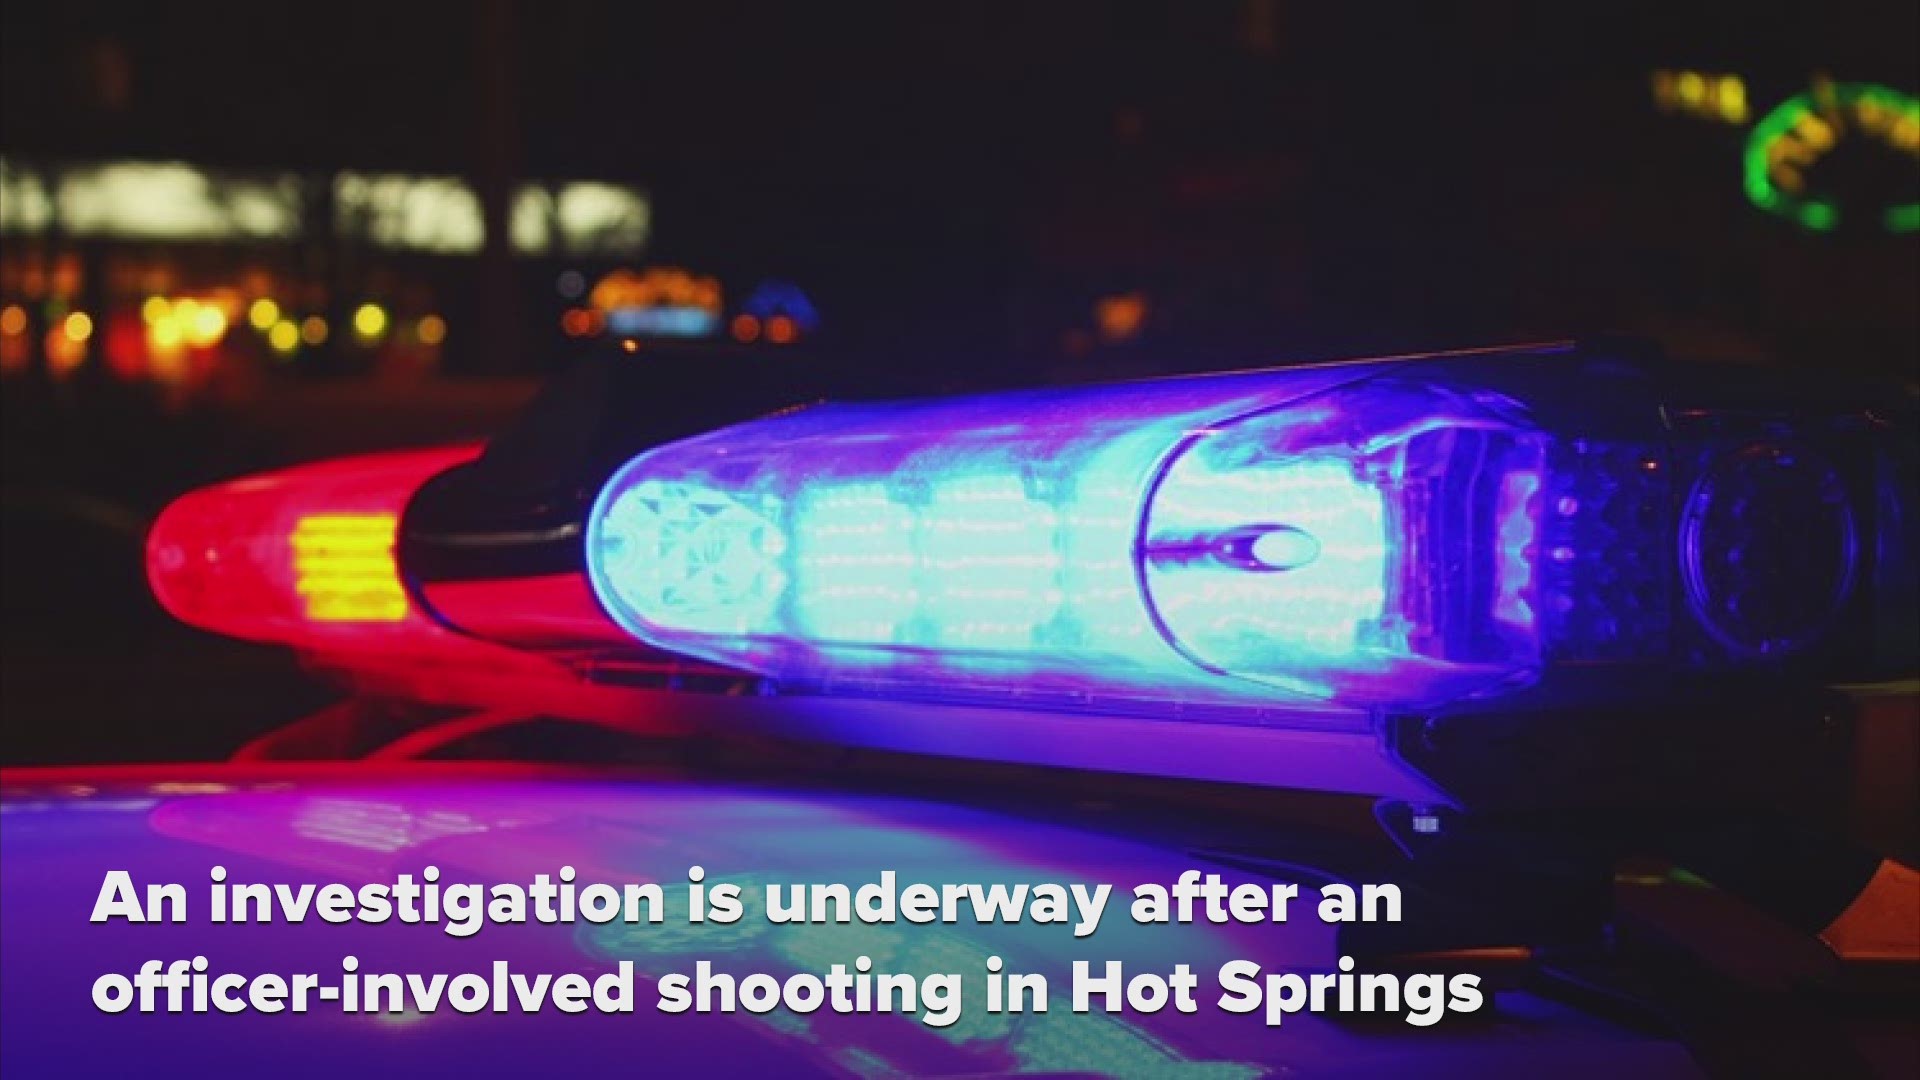 An investigation is underway after an officer-involved shooting in Hot Springs.